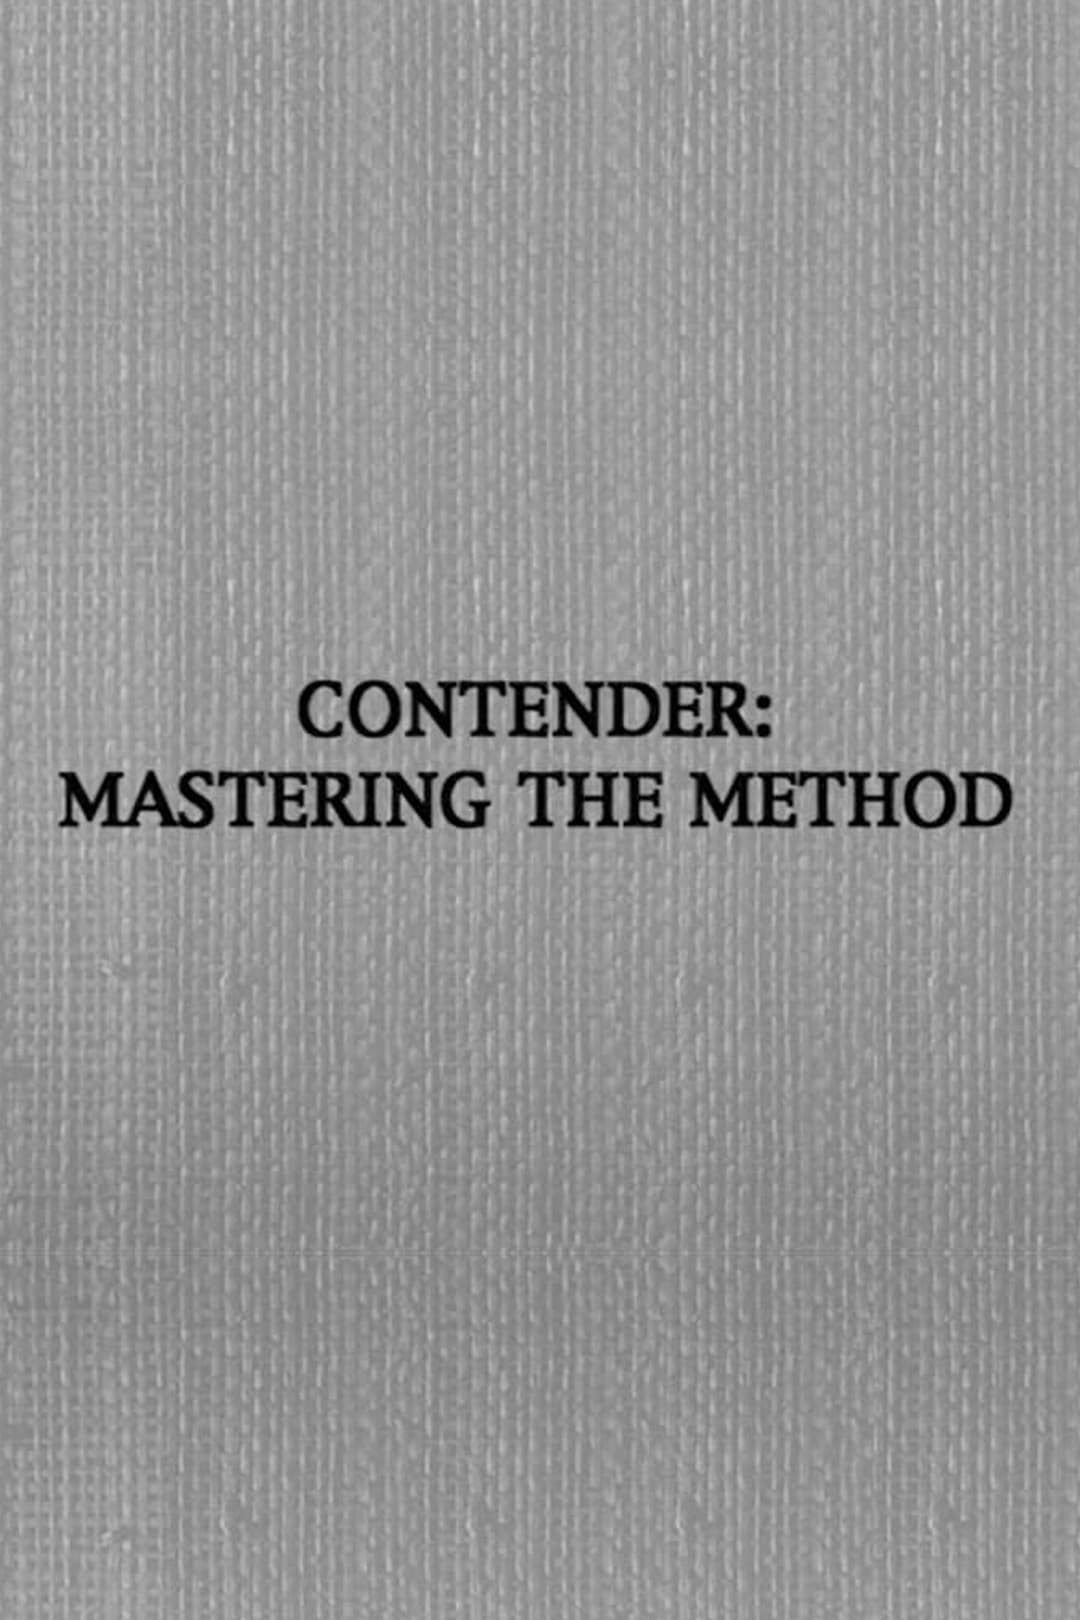 Contender: Mastering the Method (2001)